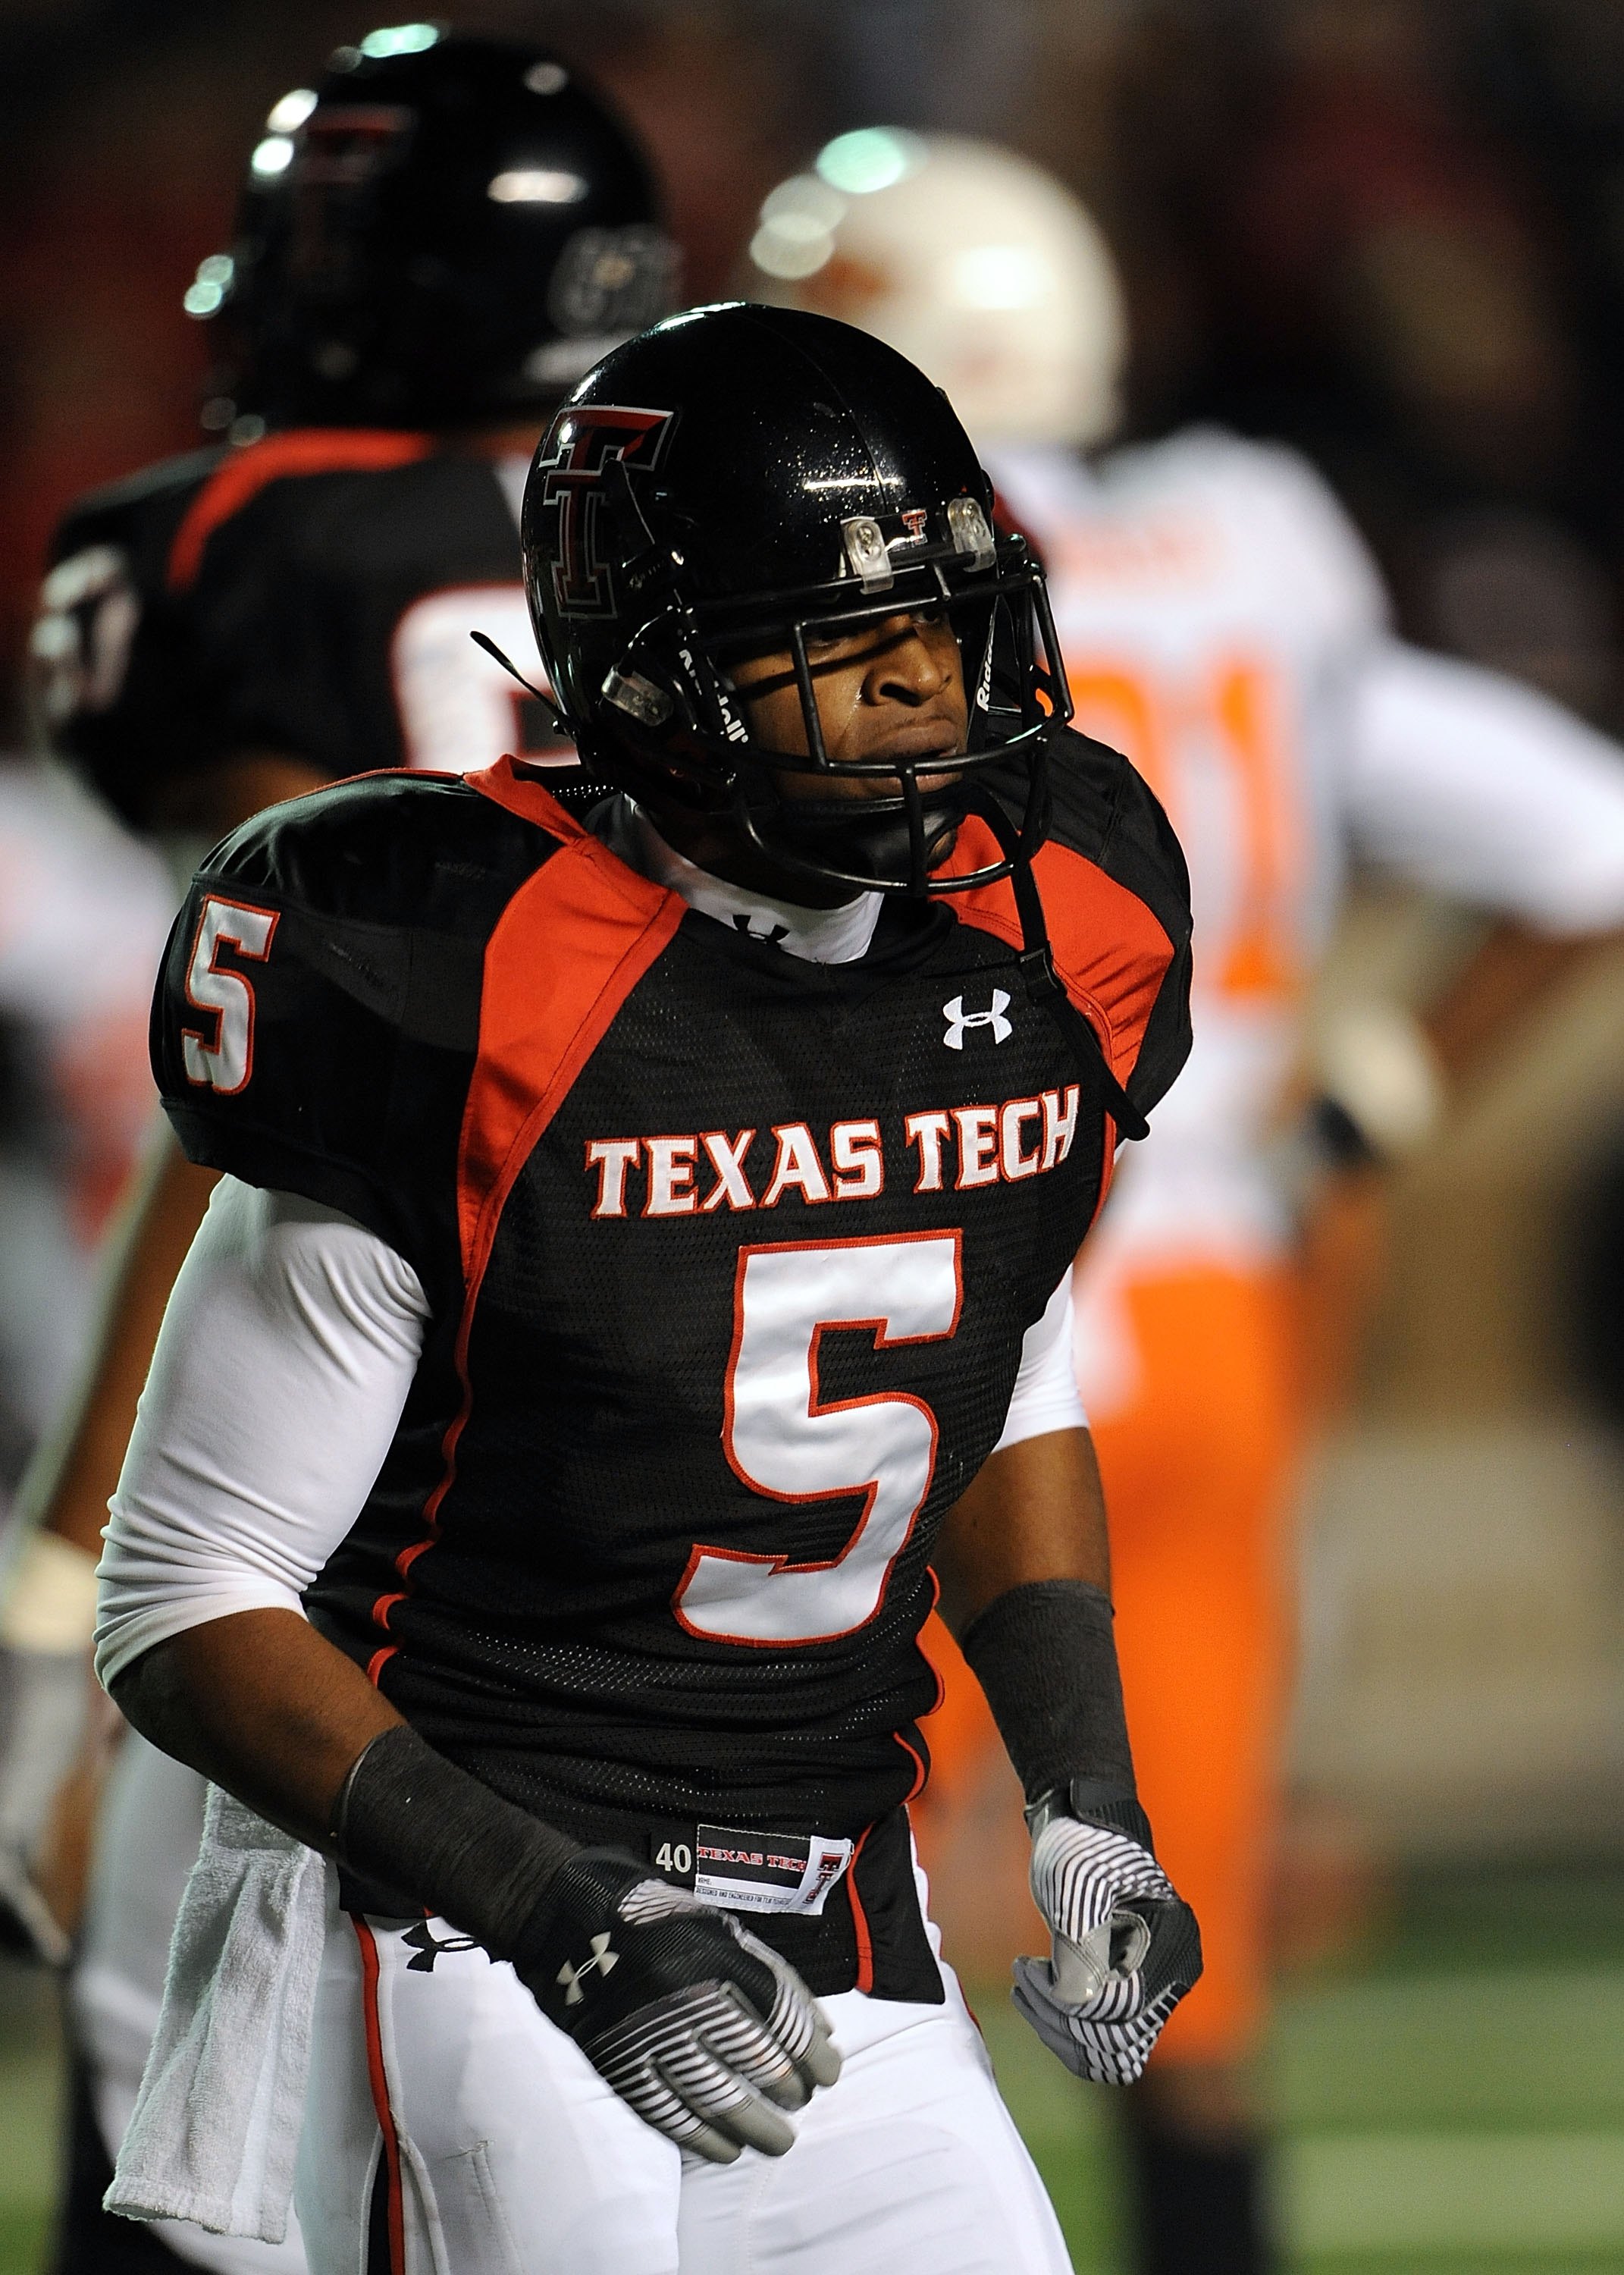 LUBBOCK, TX - NOVEMBER 08:  Wide receiver Michael Crabtree #5 of the Texas Tech Red Raiders during play against the Oklahoma State Cowboys at Jones AT&T Stadium on November 8, 2008 in Lubbock, Texas.  (Photo by Ronald Martinez/Getty Images)